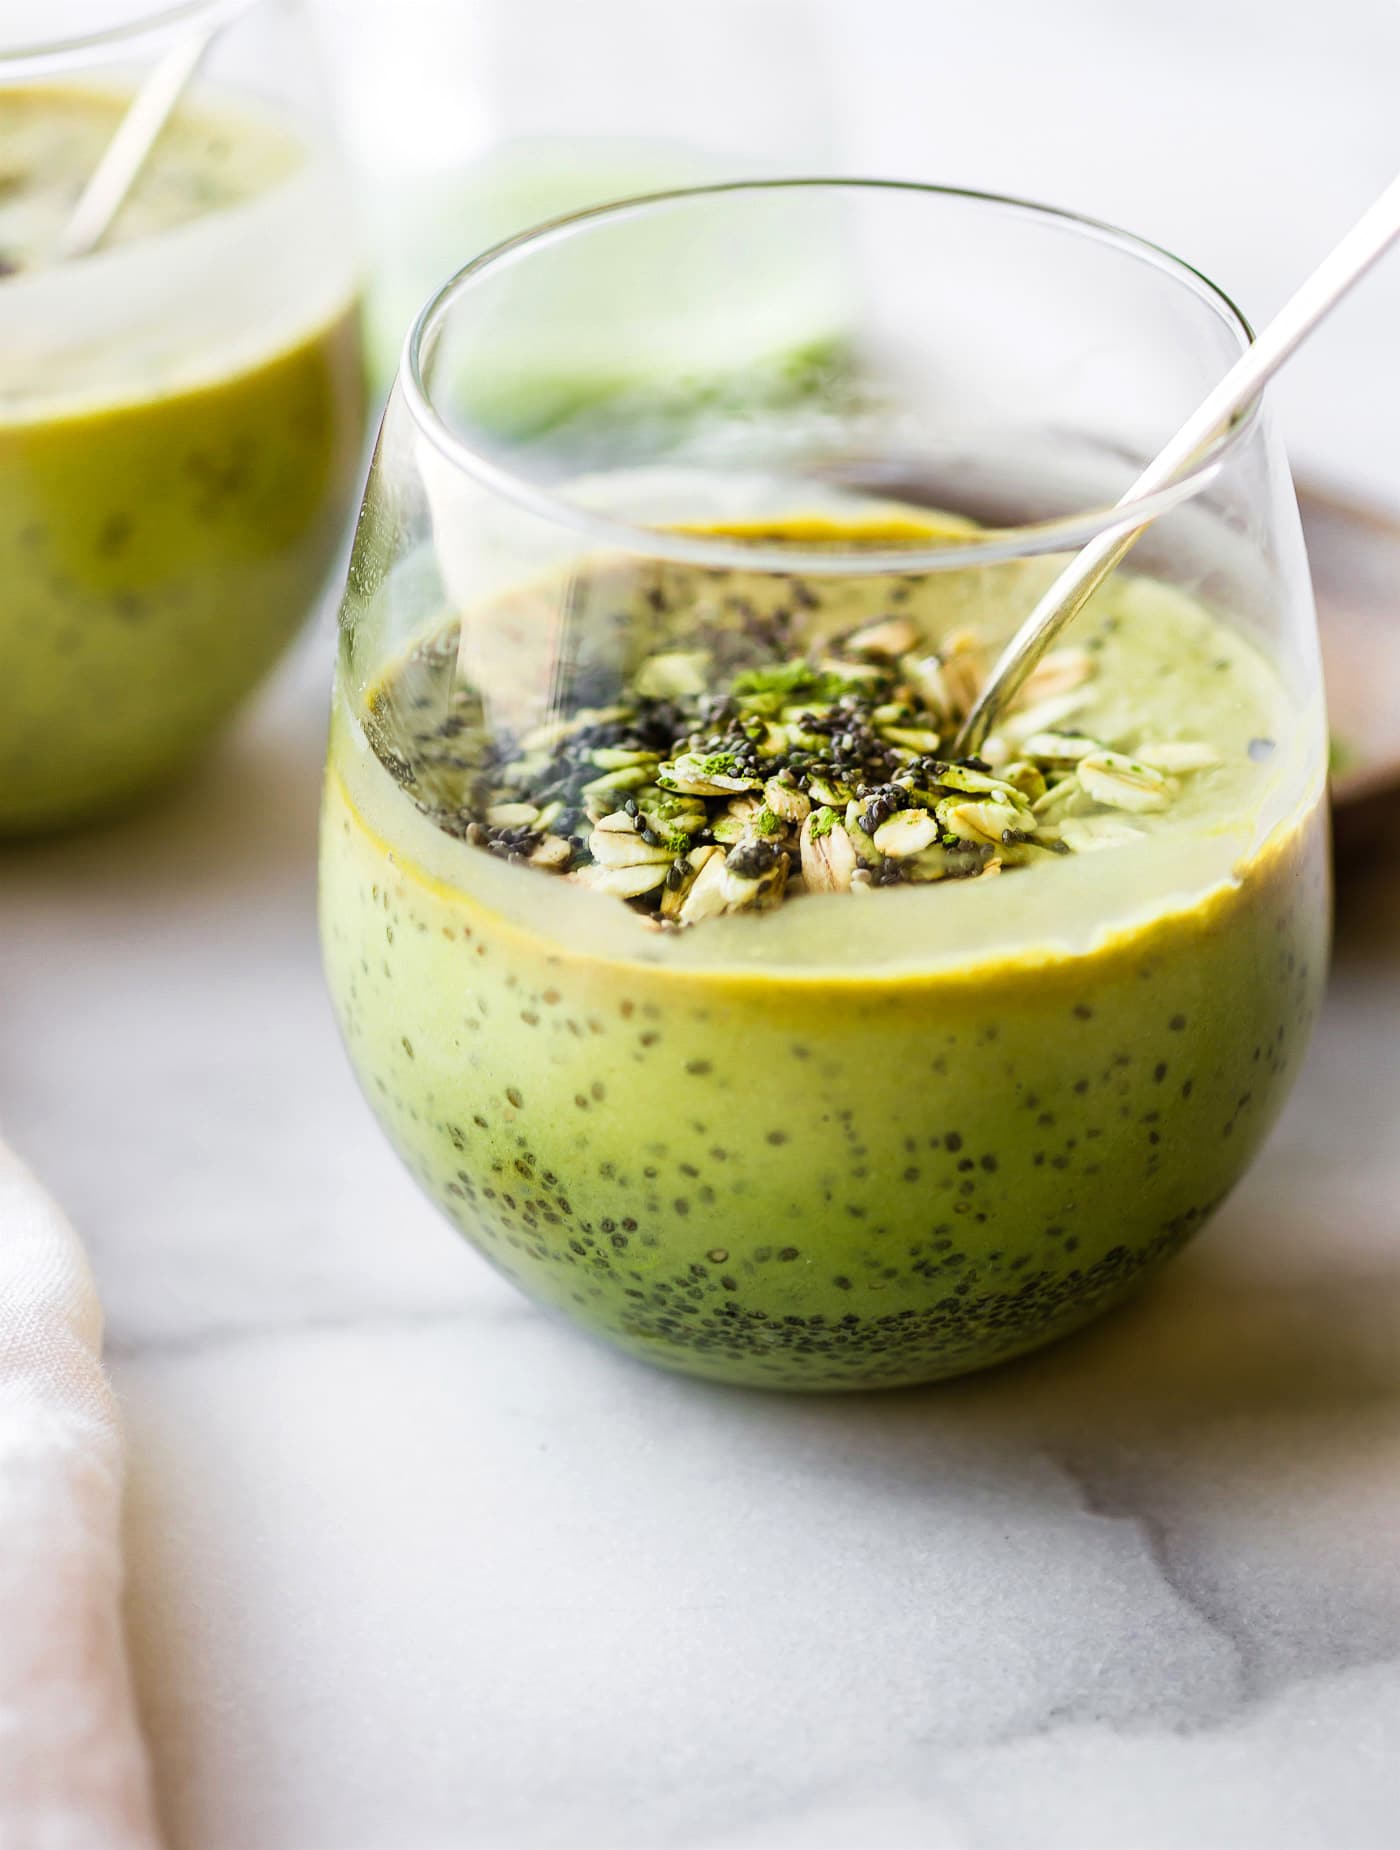 Chia pudding in a small glass jar, topped with oats, chia seeds and matcha powder.